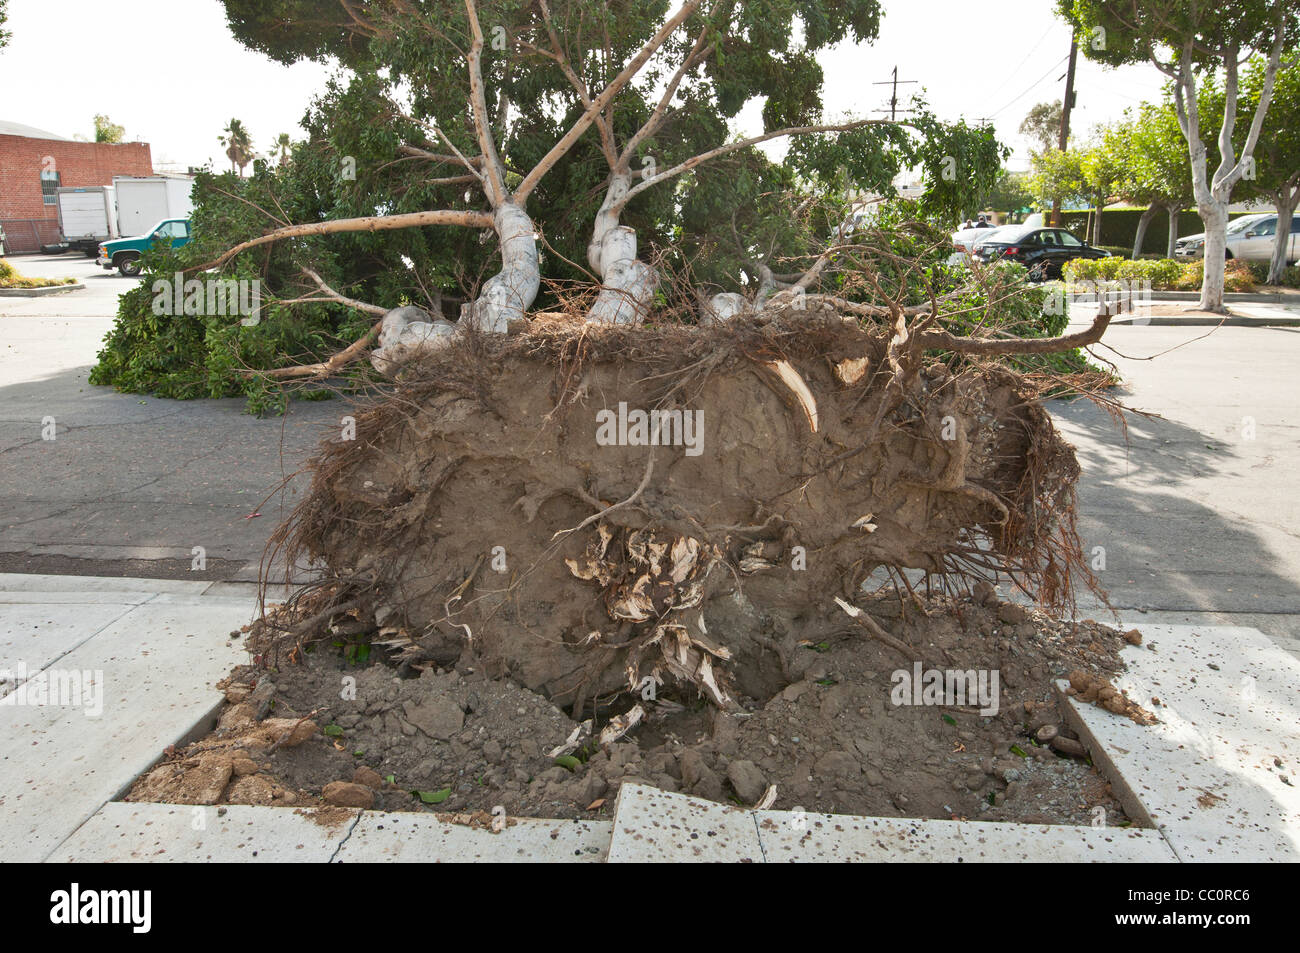 A collapsed tree due to severe winds. Hurricane strength winds knocked down a huge number of trees. Stock Photo